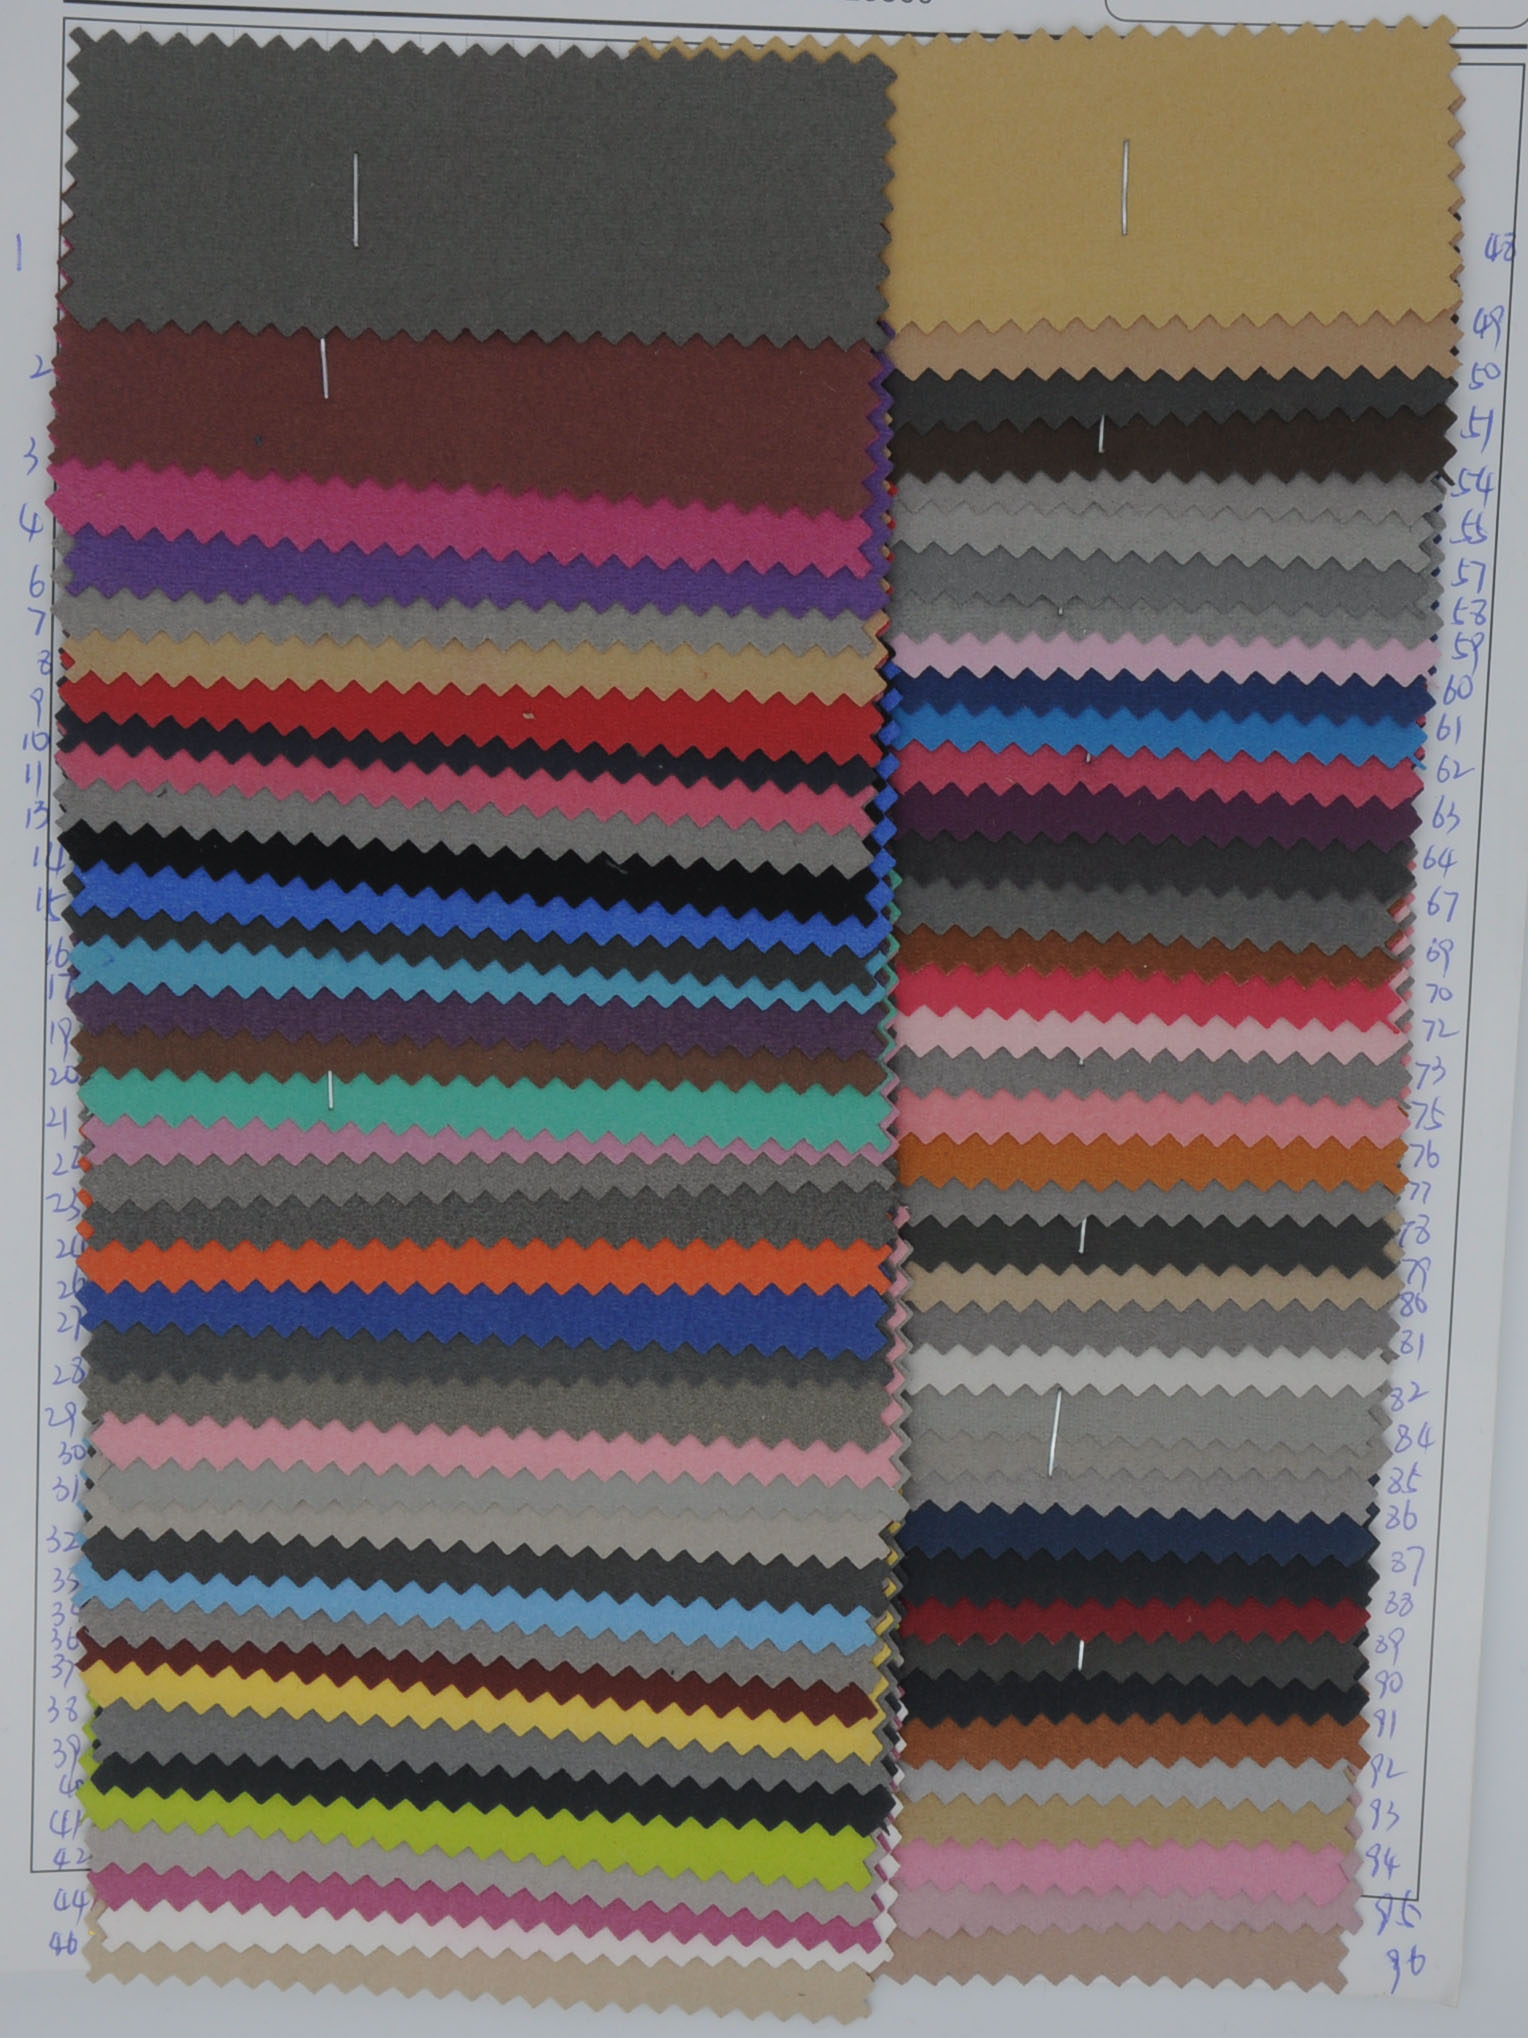 Microfiber Leather Color Chart